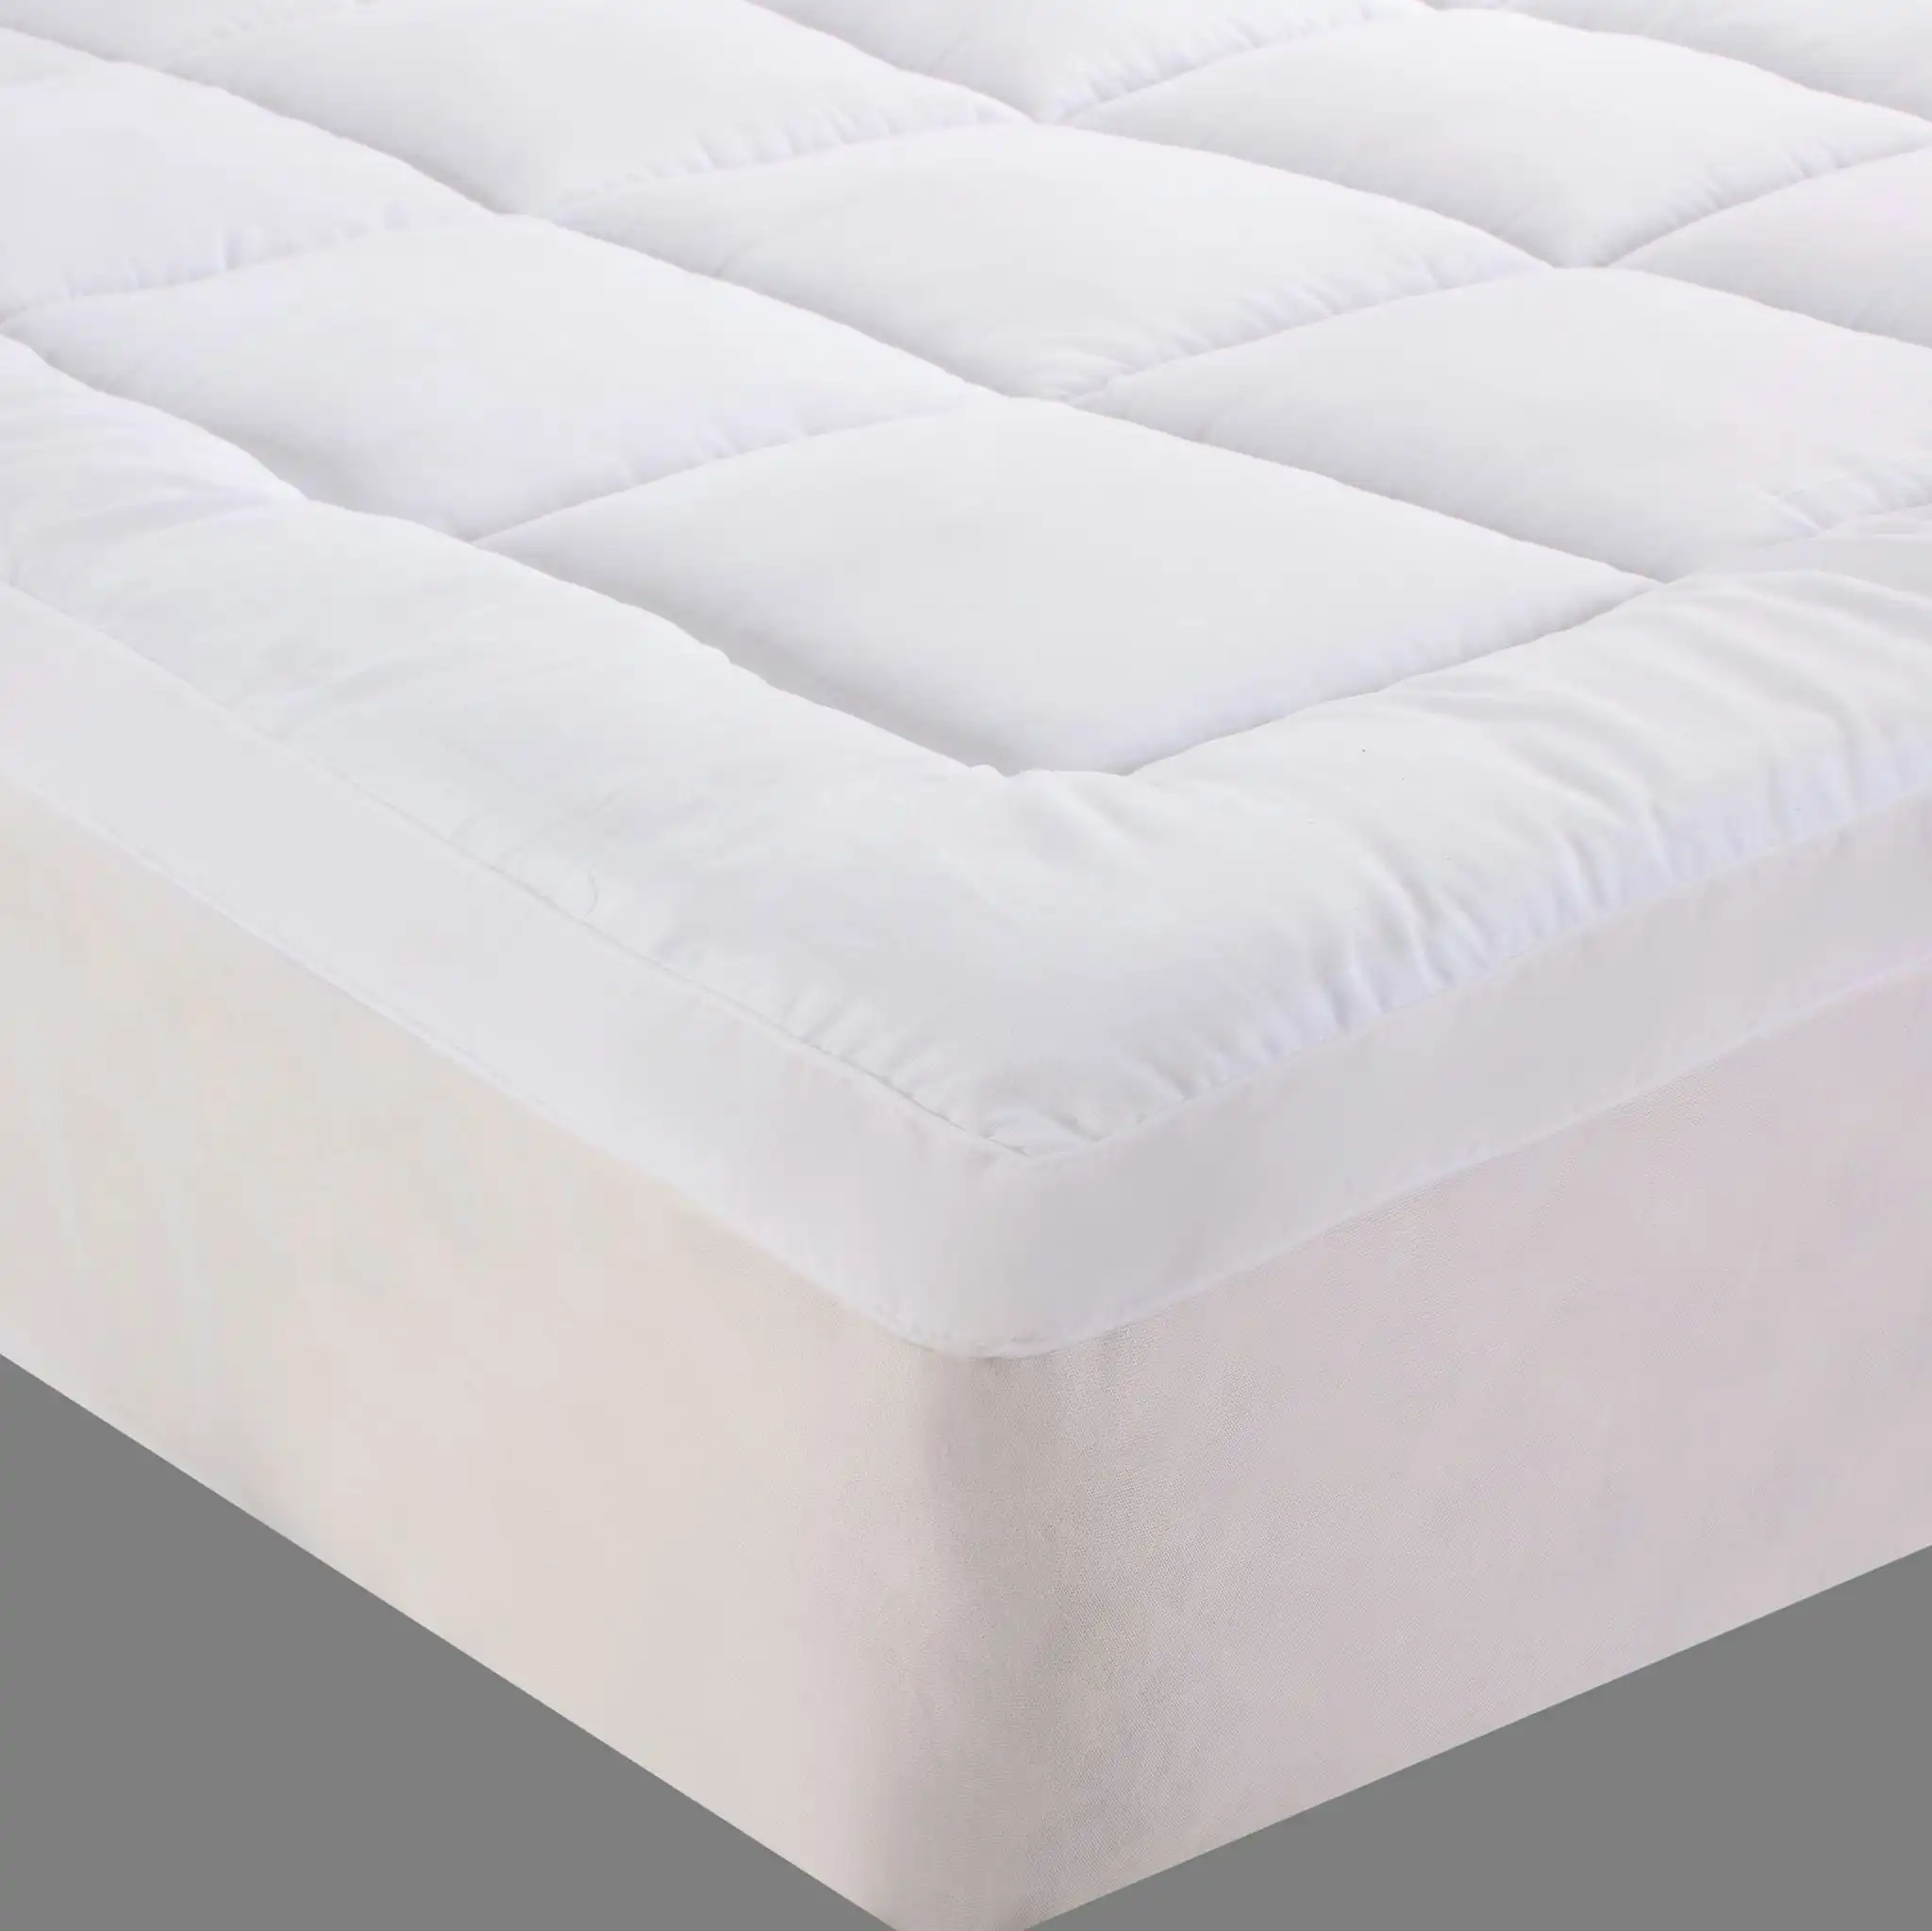 Abhomefashion 1000gsm Bamboo Cotton Fitted Mattress Topper